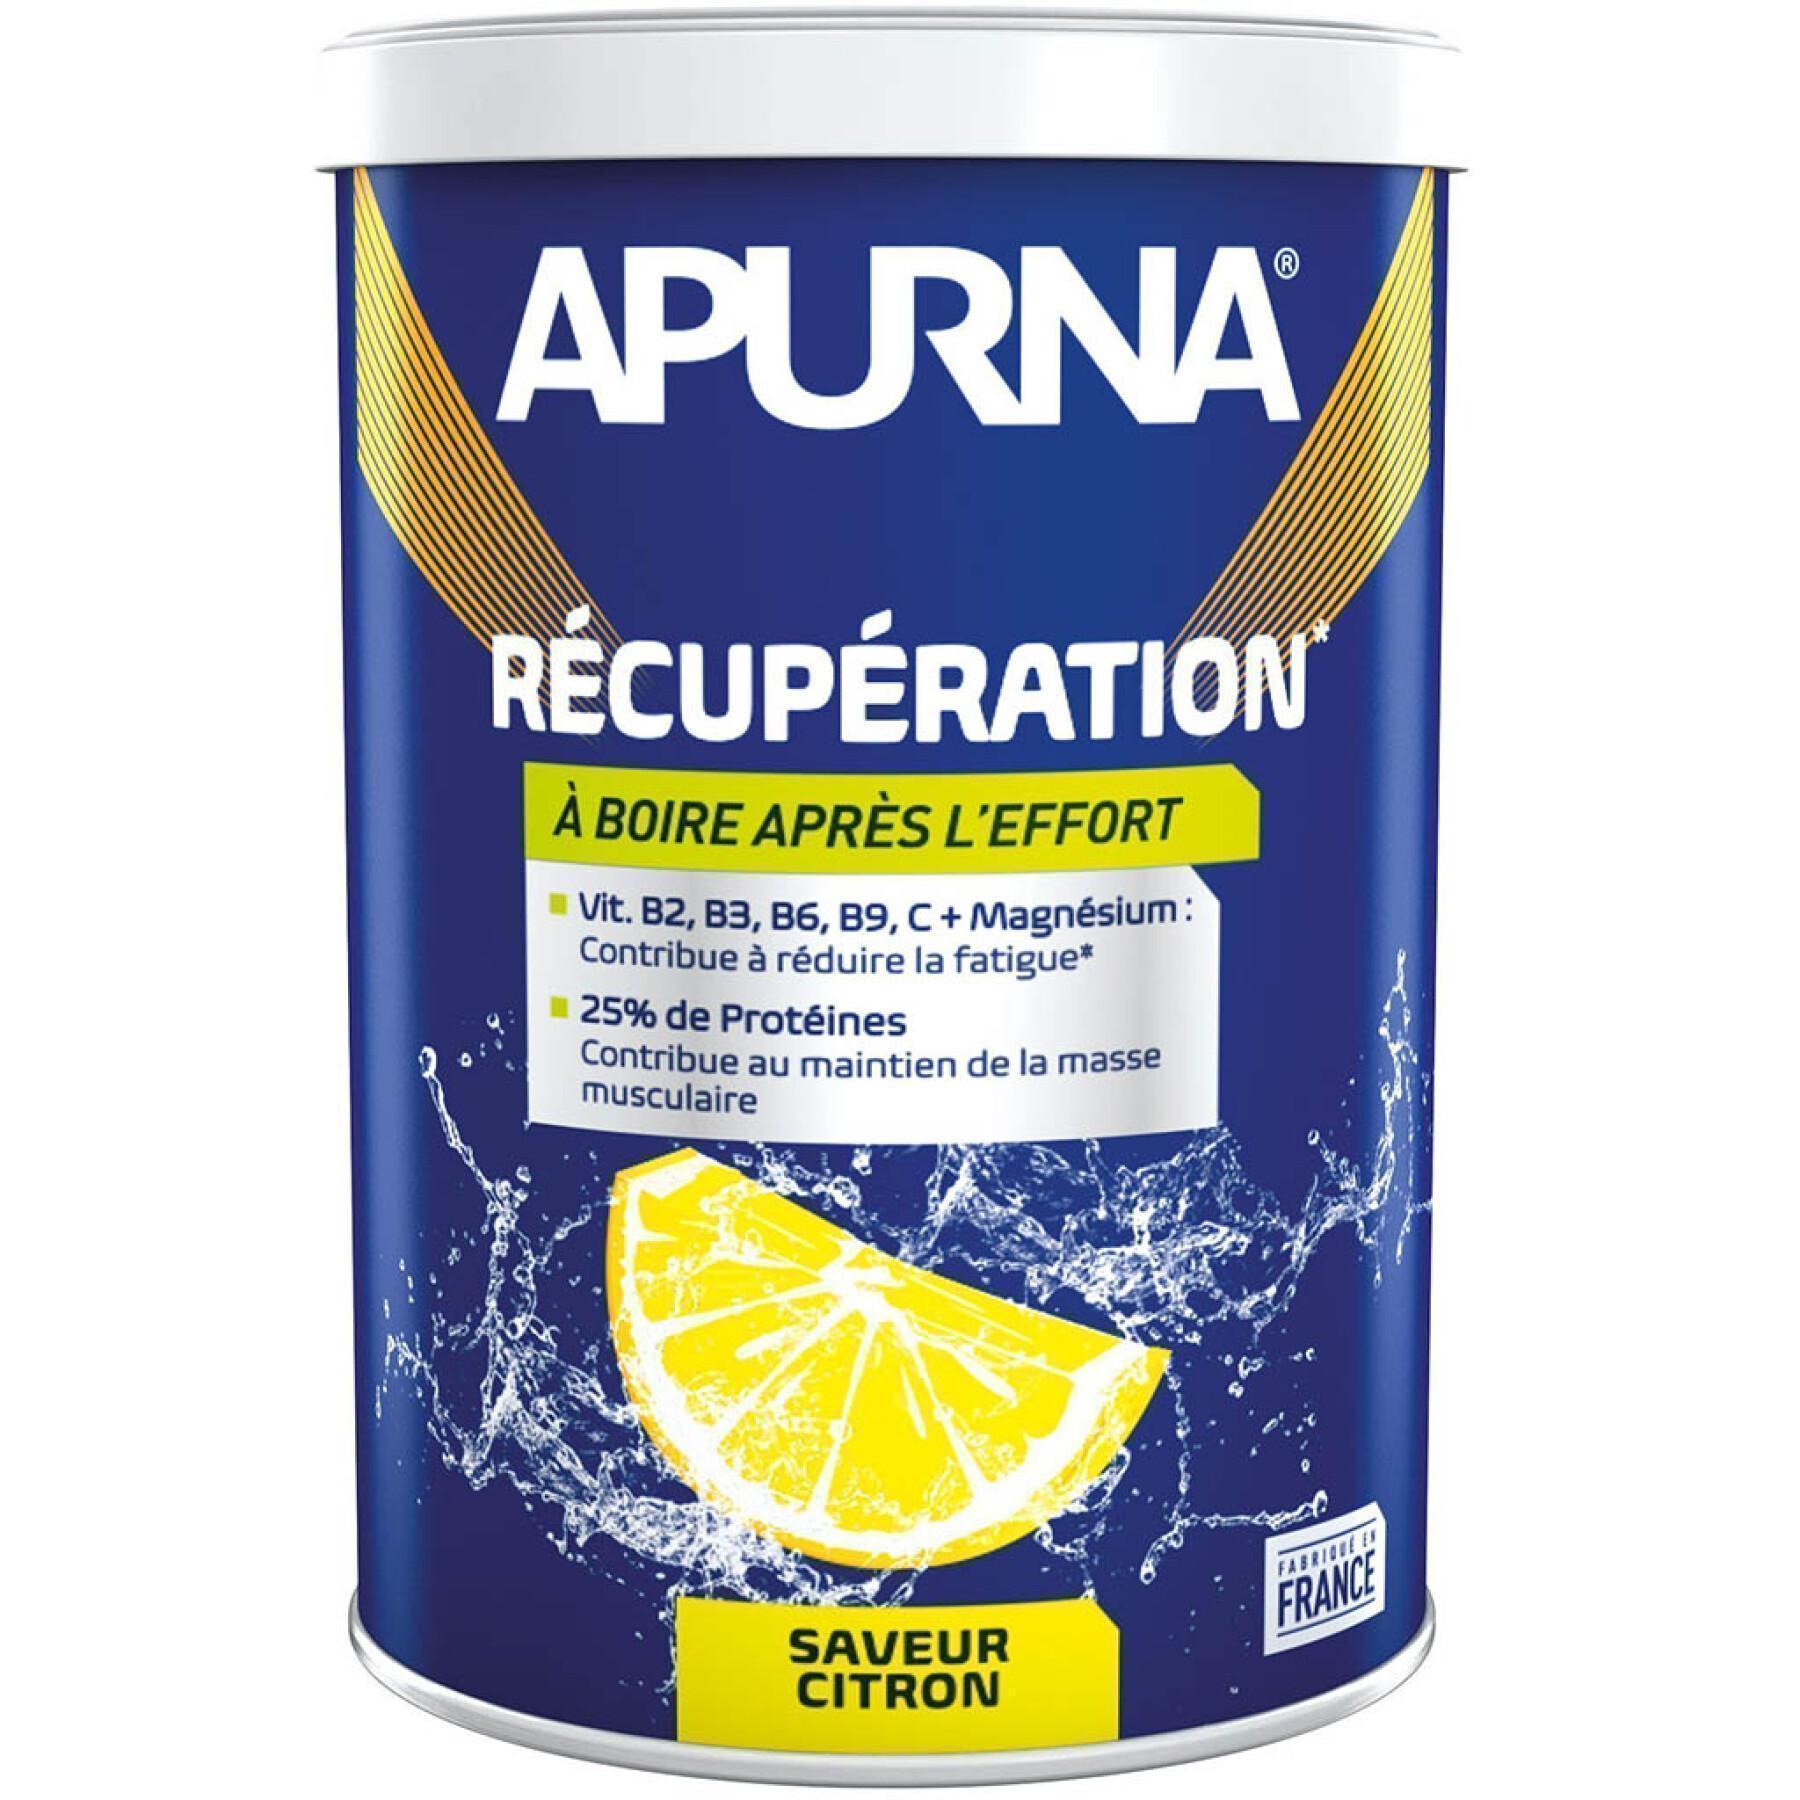 Recovery drink lemon protein can Apurna